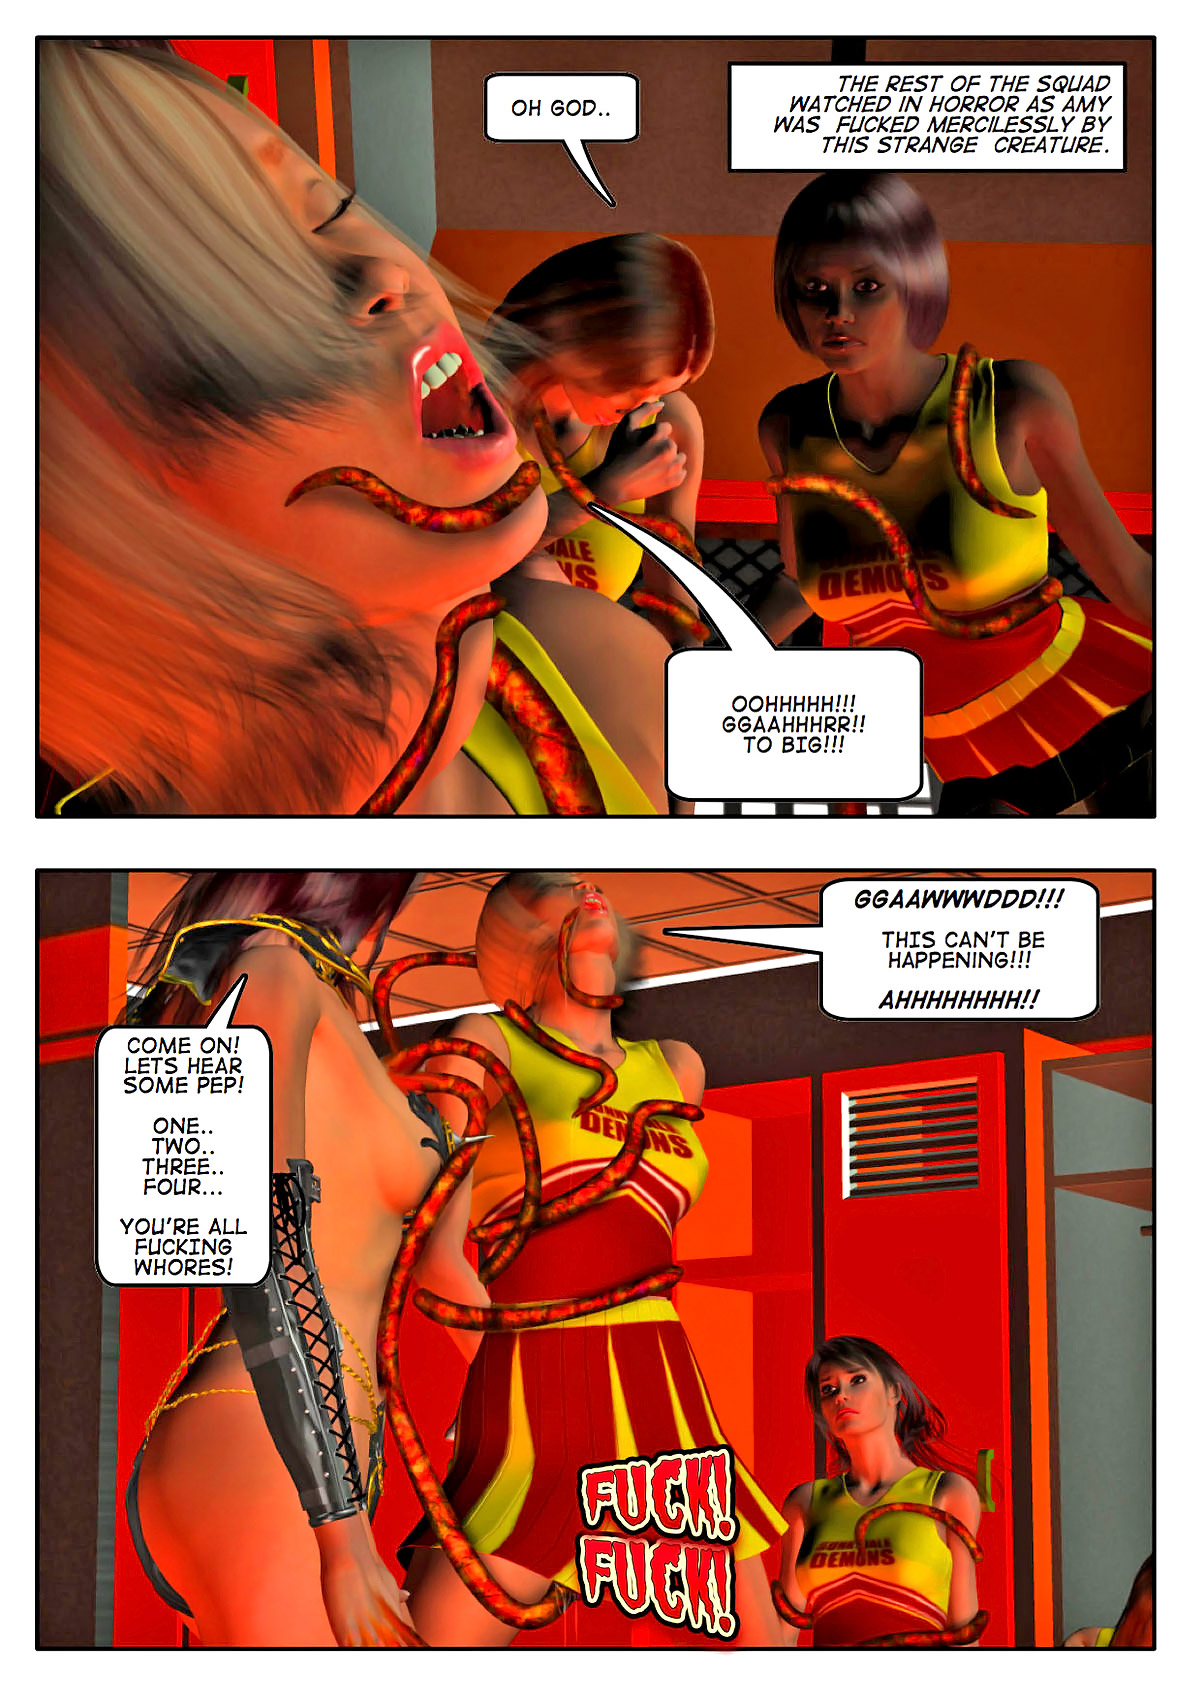 Cheerleader having sex with a tentacle monster - 3D monster comic at  Hd3dMonsterSex.com